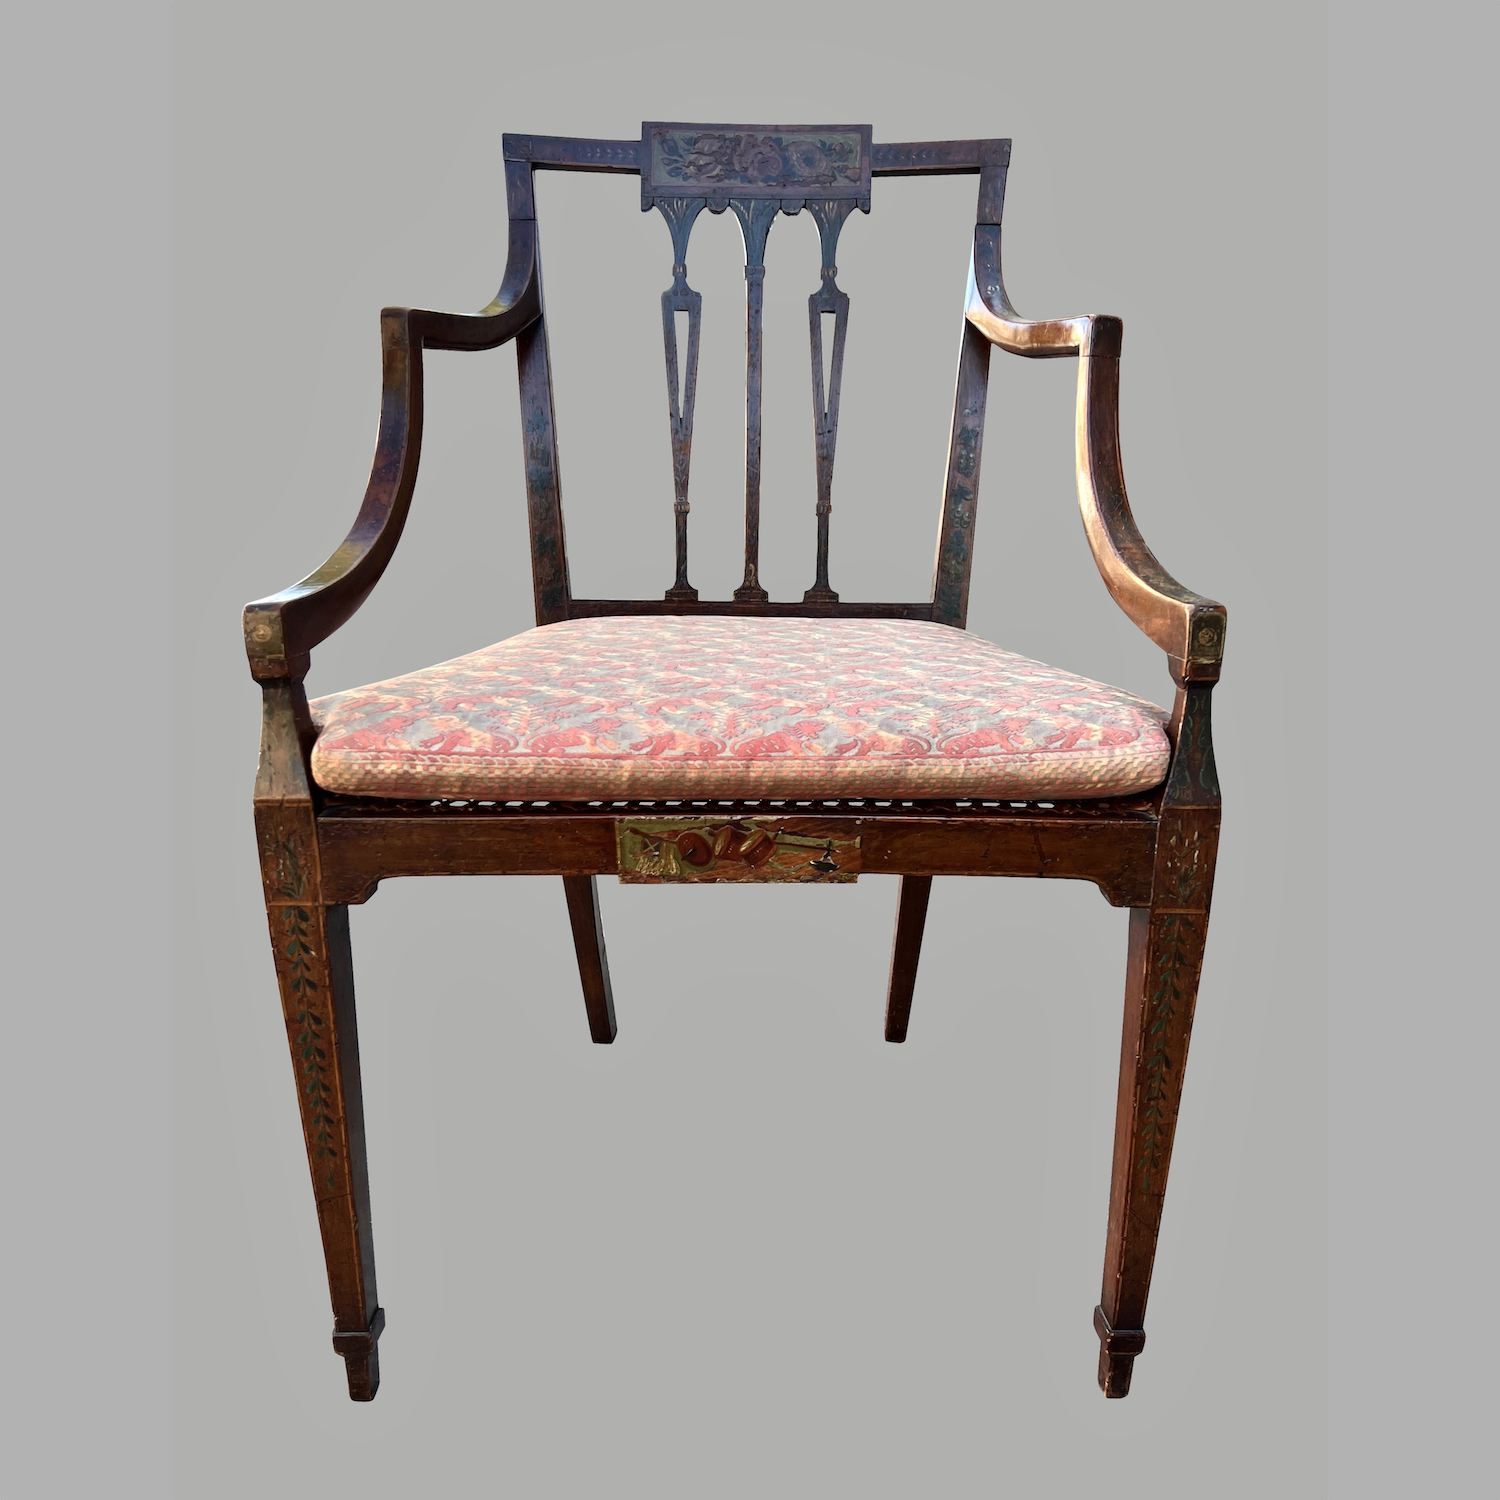 adam-style-painted-satinwood-armchair-with-floral-decoration-caned-seat-c723-39